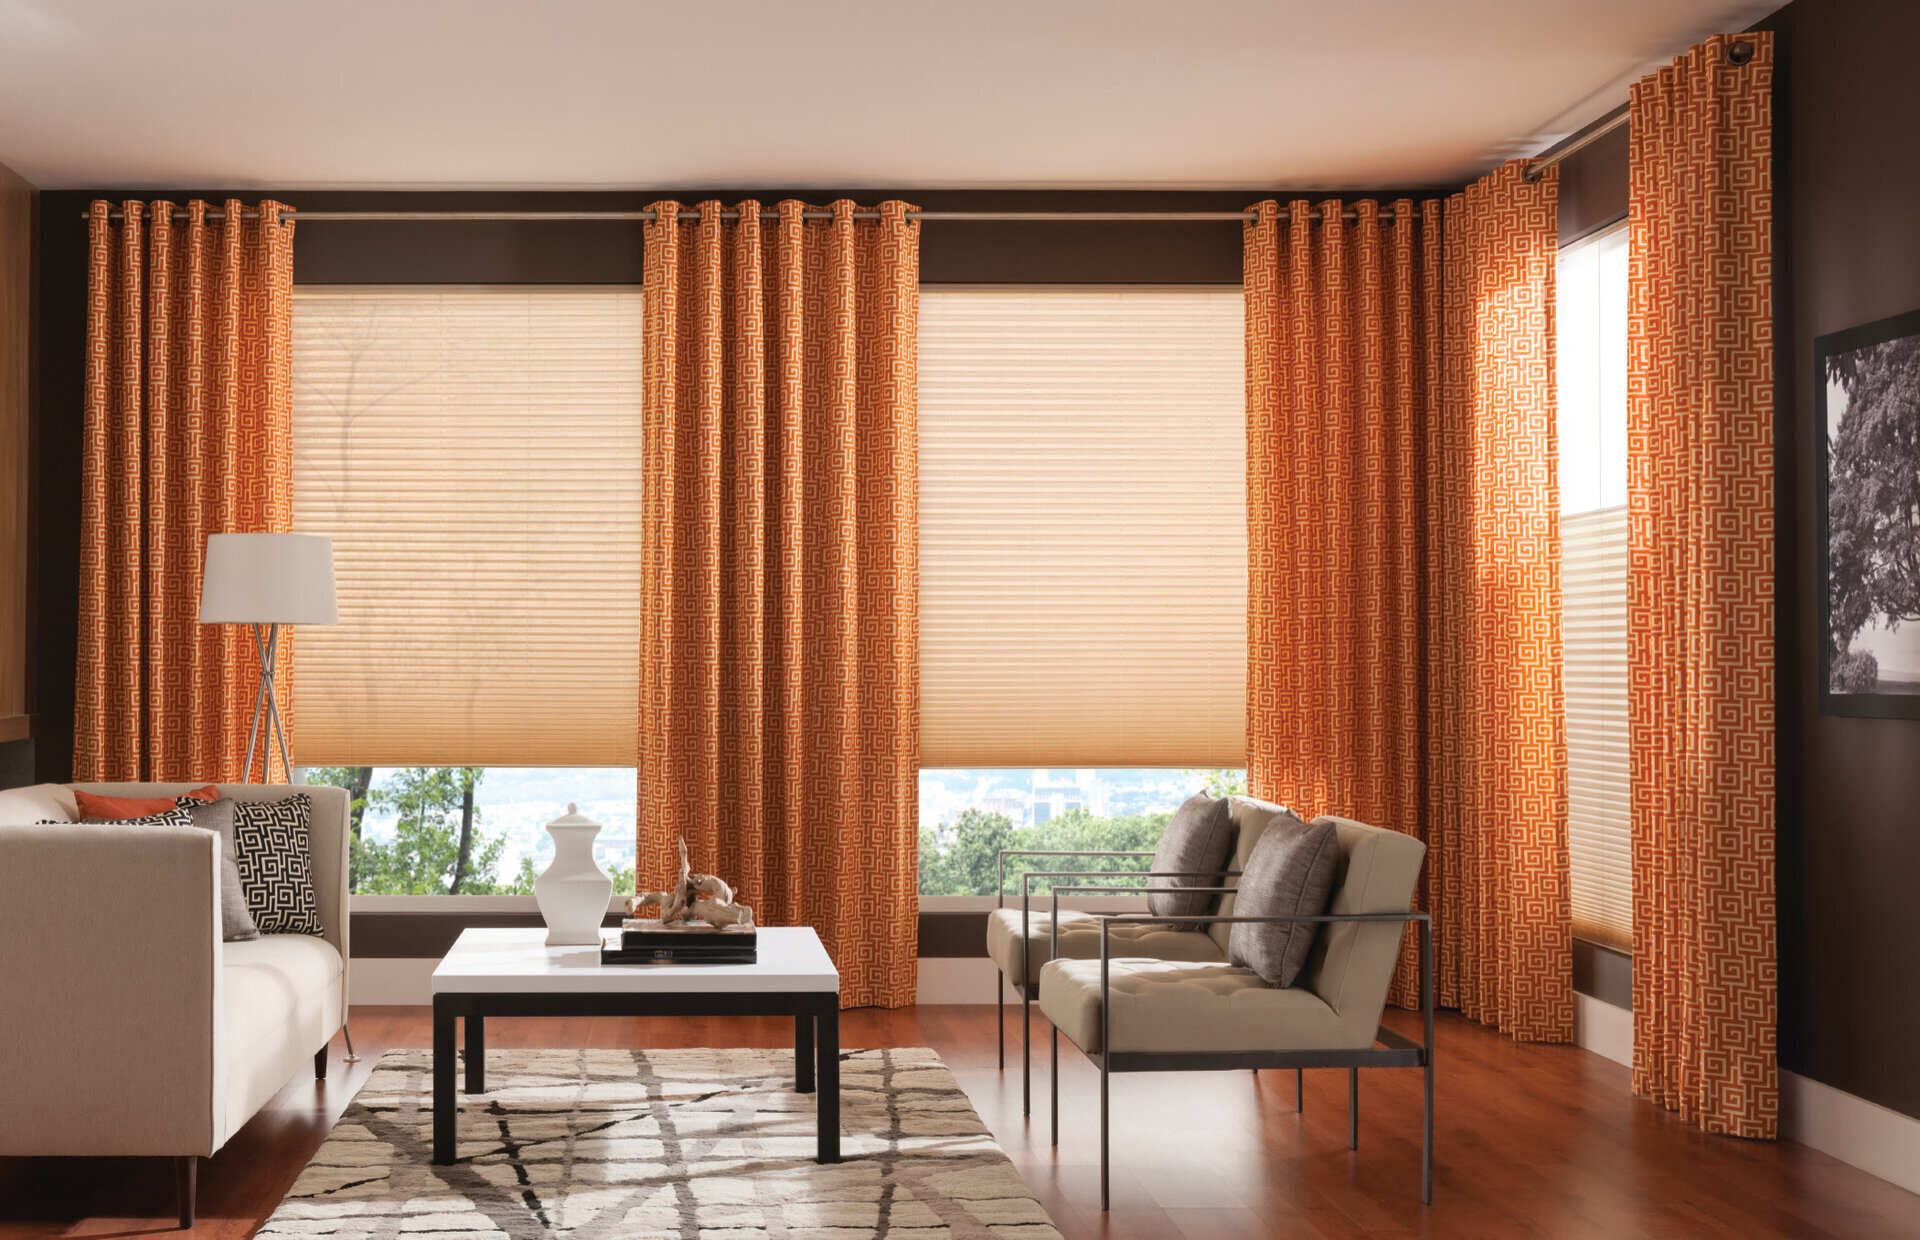 How To Replace Blinds With Curtains